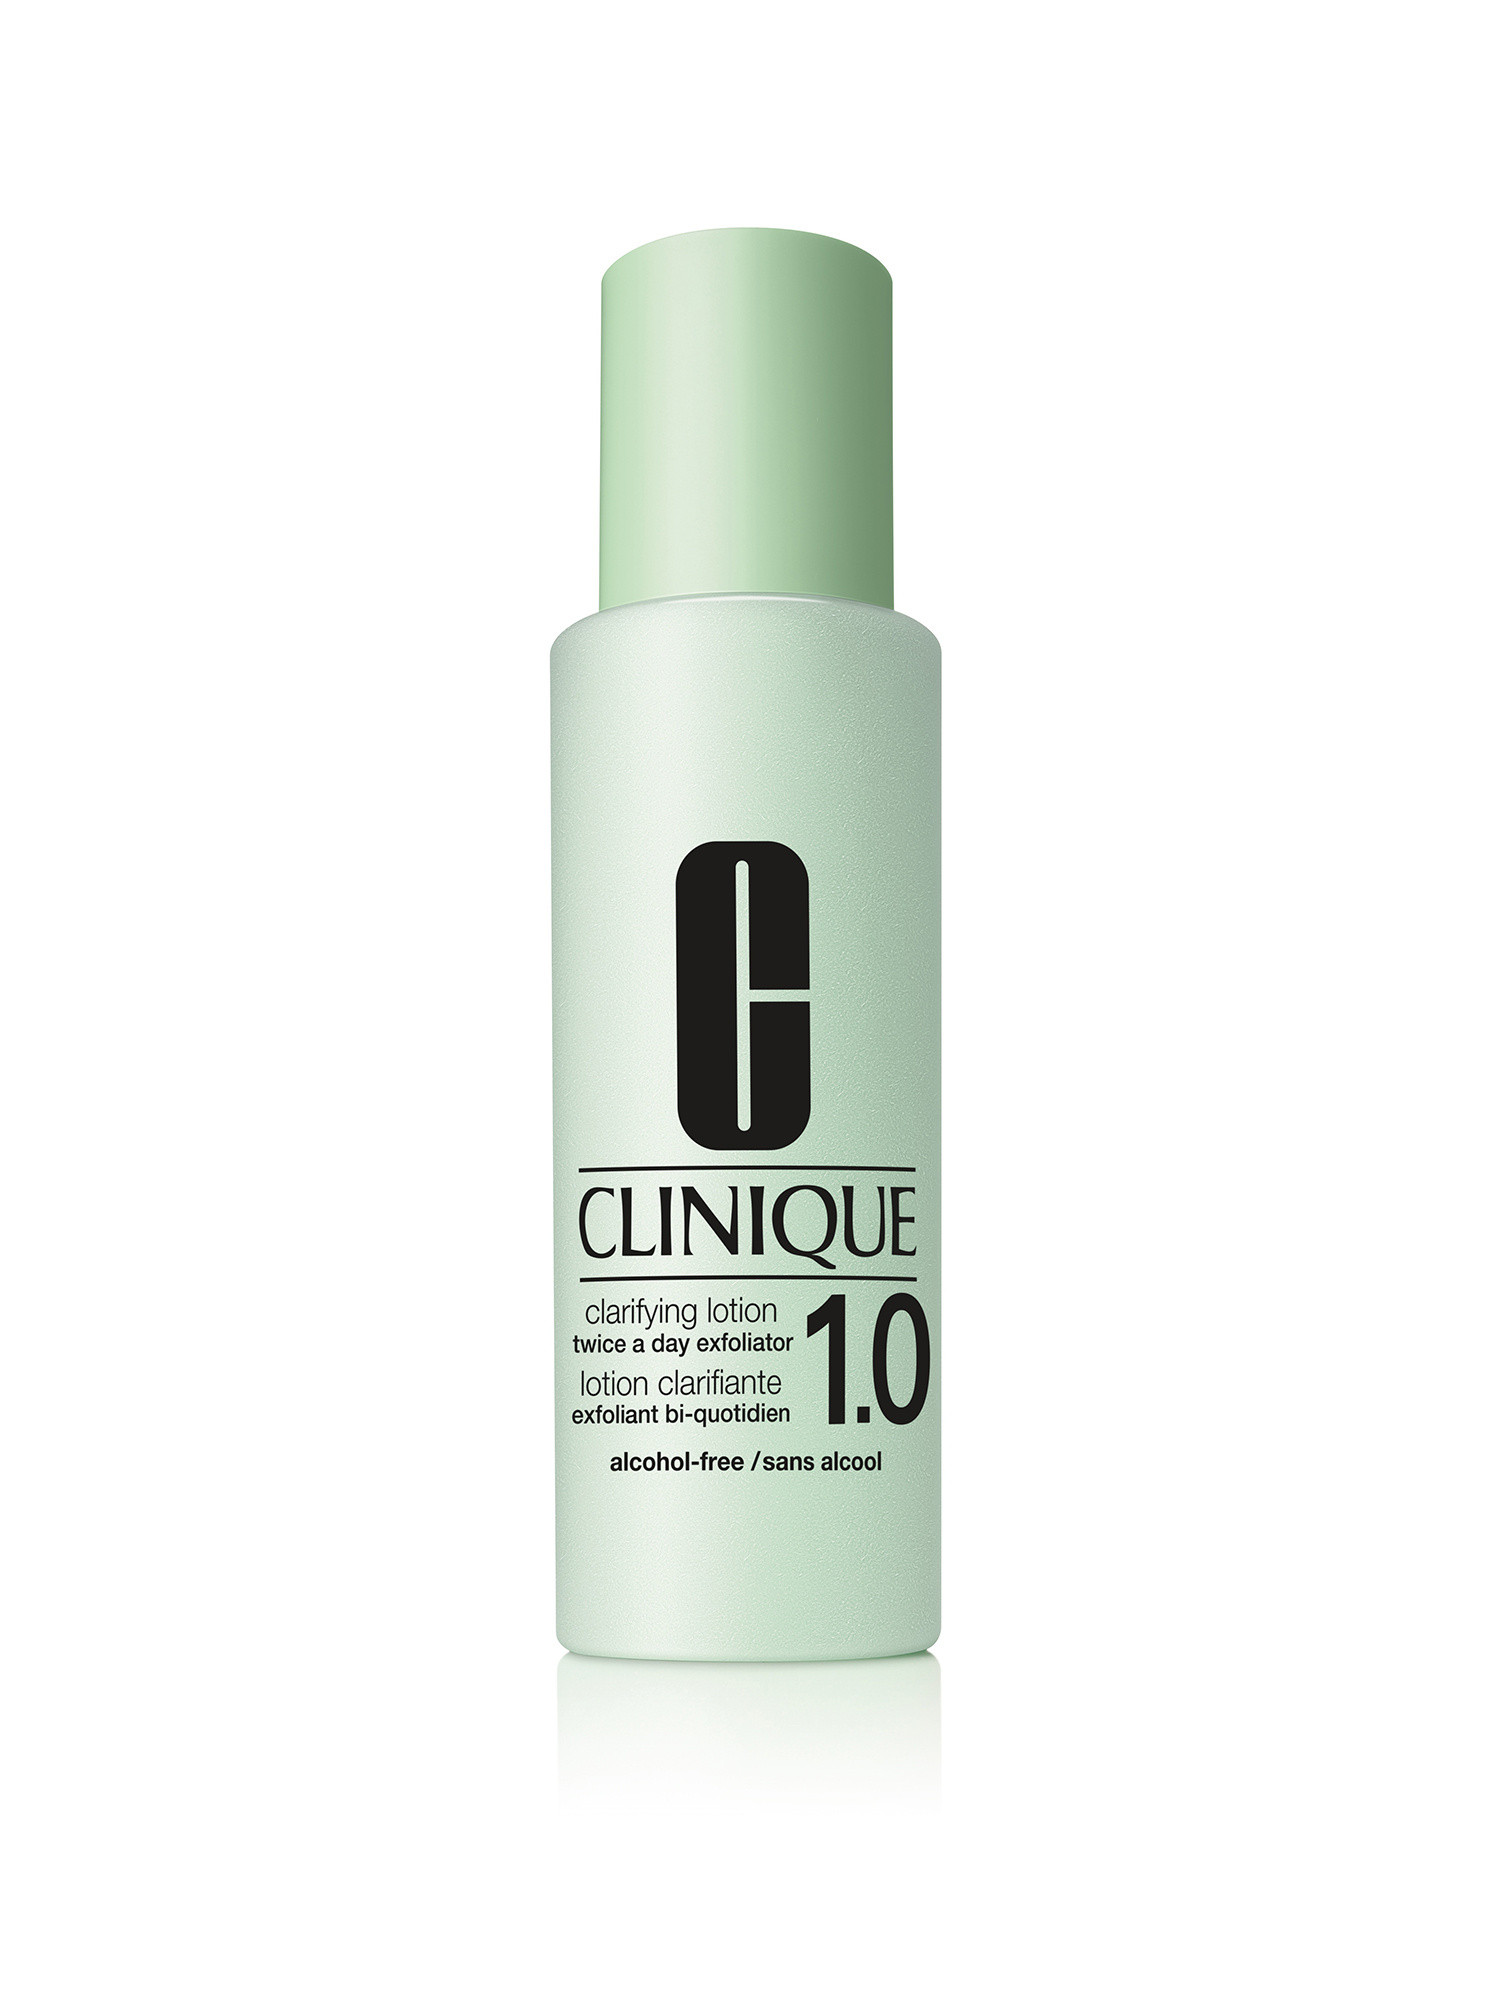 Clinique clarifying lotion 1.0 no alcool - sensitive skin 200 ml, Green, large image number 0